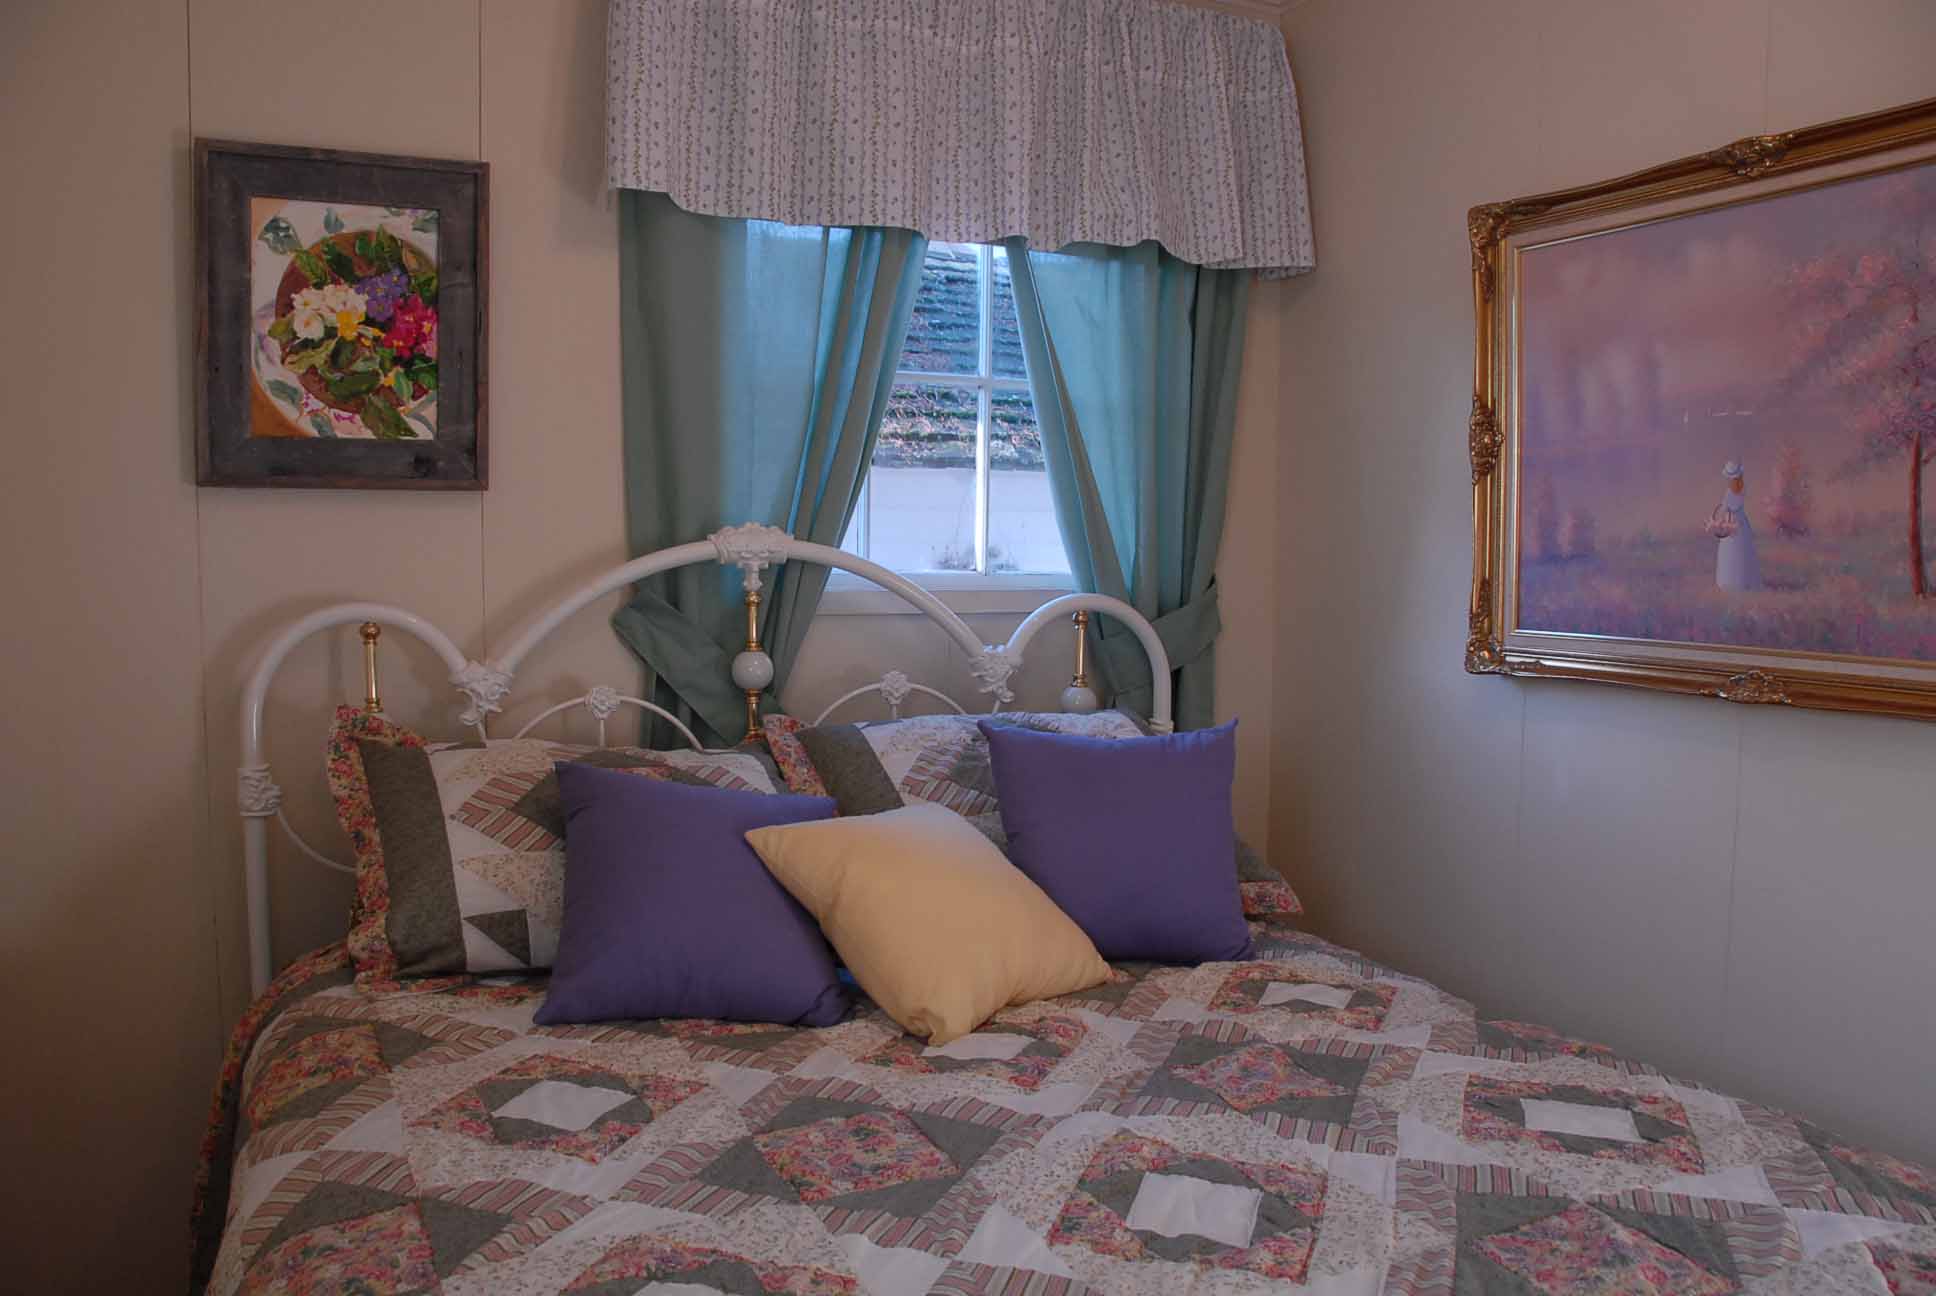 The master bedroom, includes queen size bed with white iron Victorian headboard, a picture on the wall of a girl picking flowers by a lake and a picture of flowers